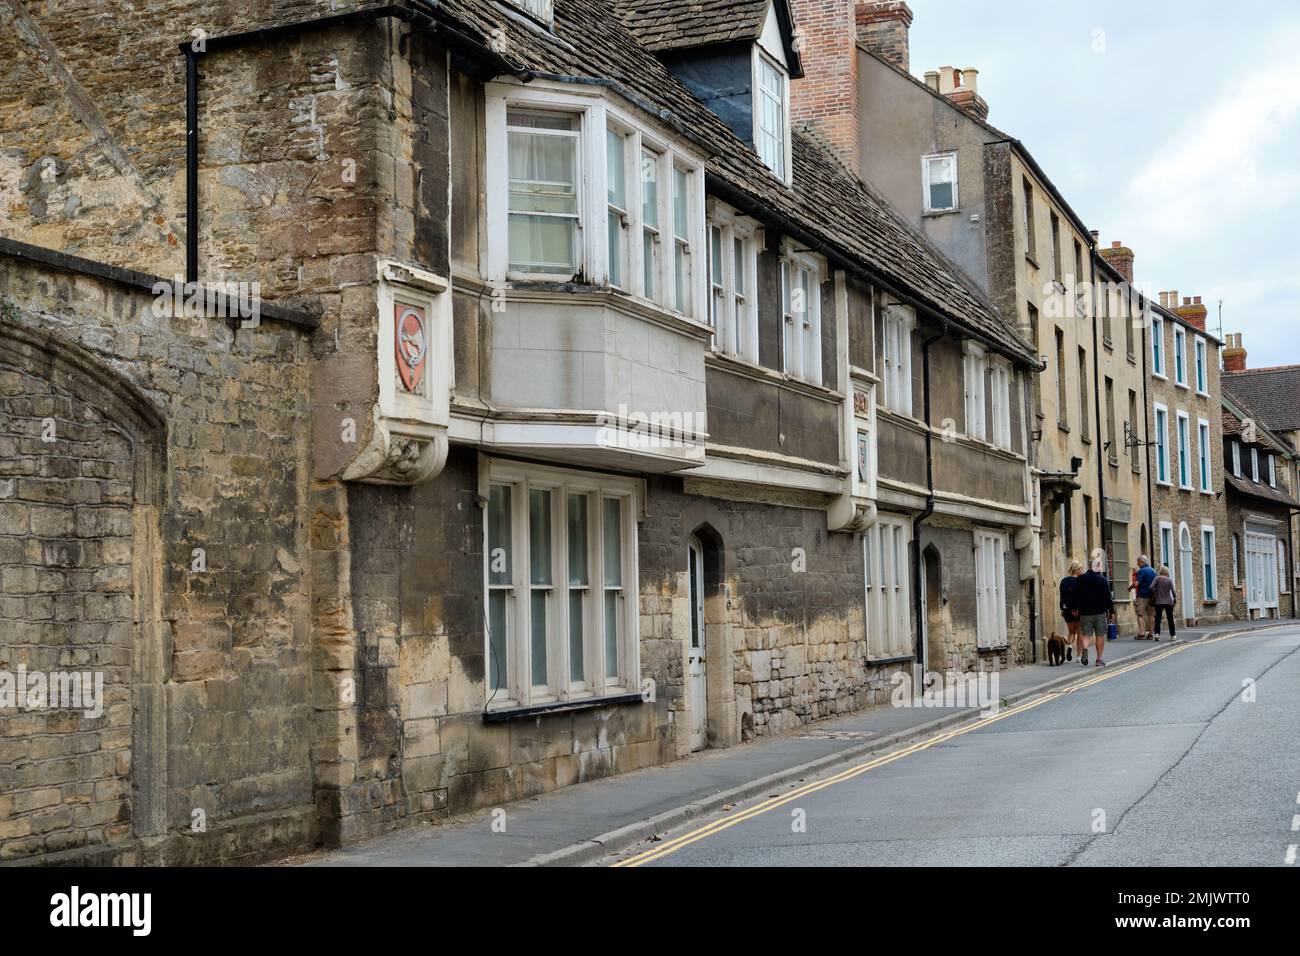 Bruton Street Views with Beautiful Old Buildings Stock Photo